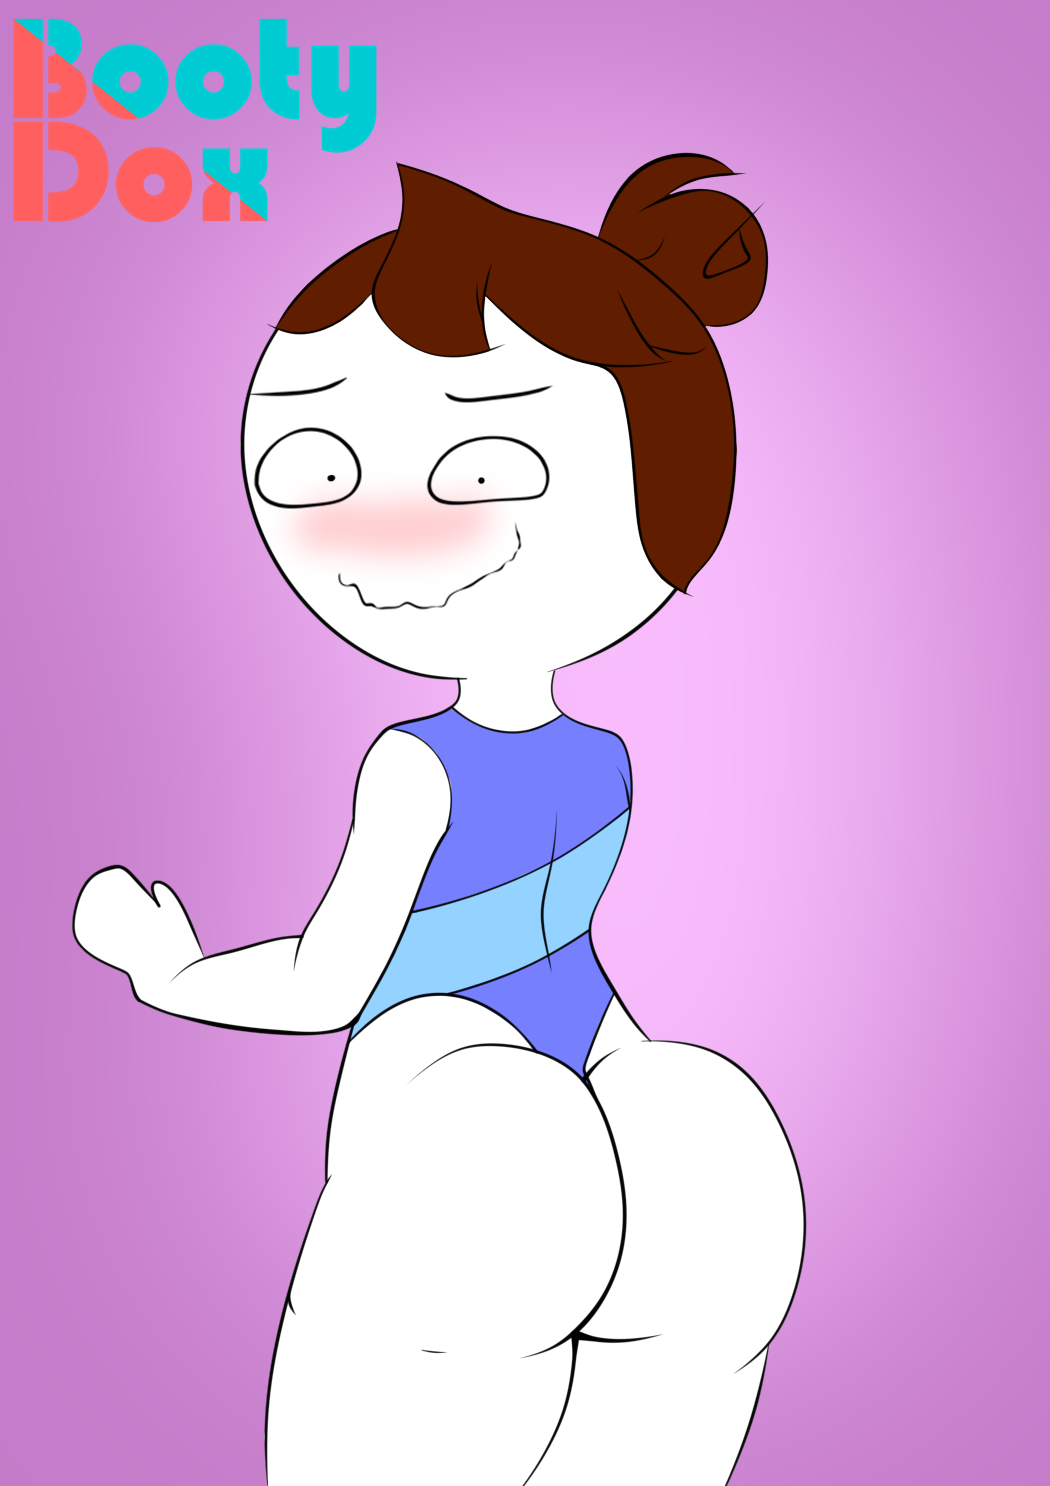 drawing use jaiden animations does program what Alvin and the chipmunks blowjob